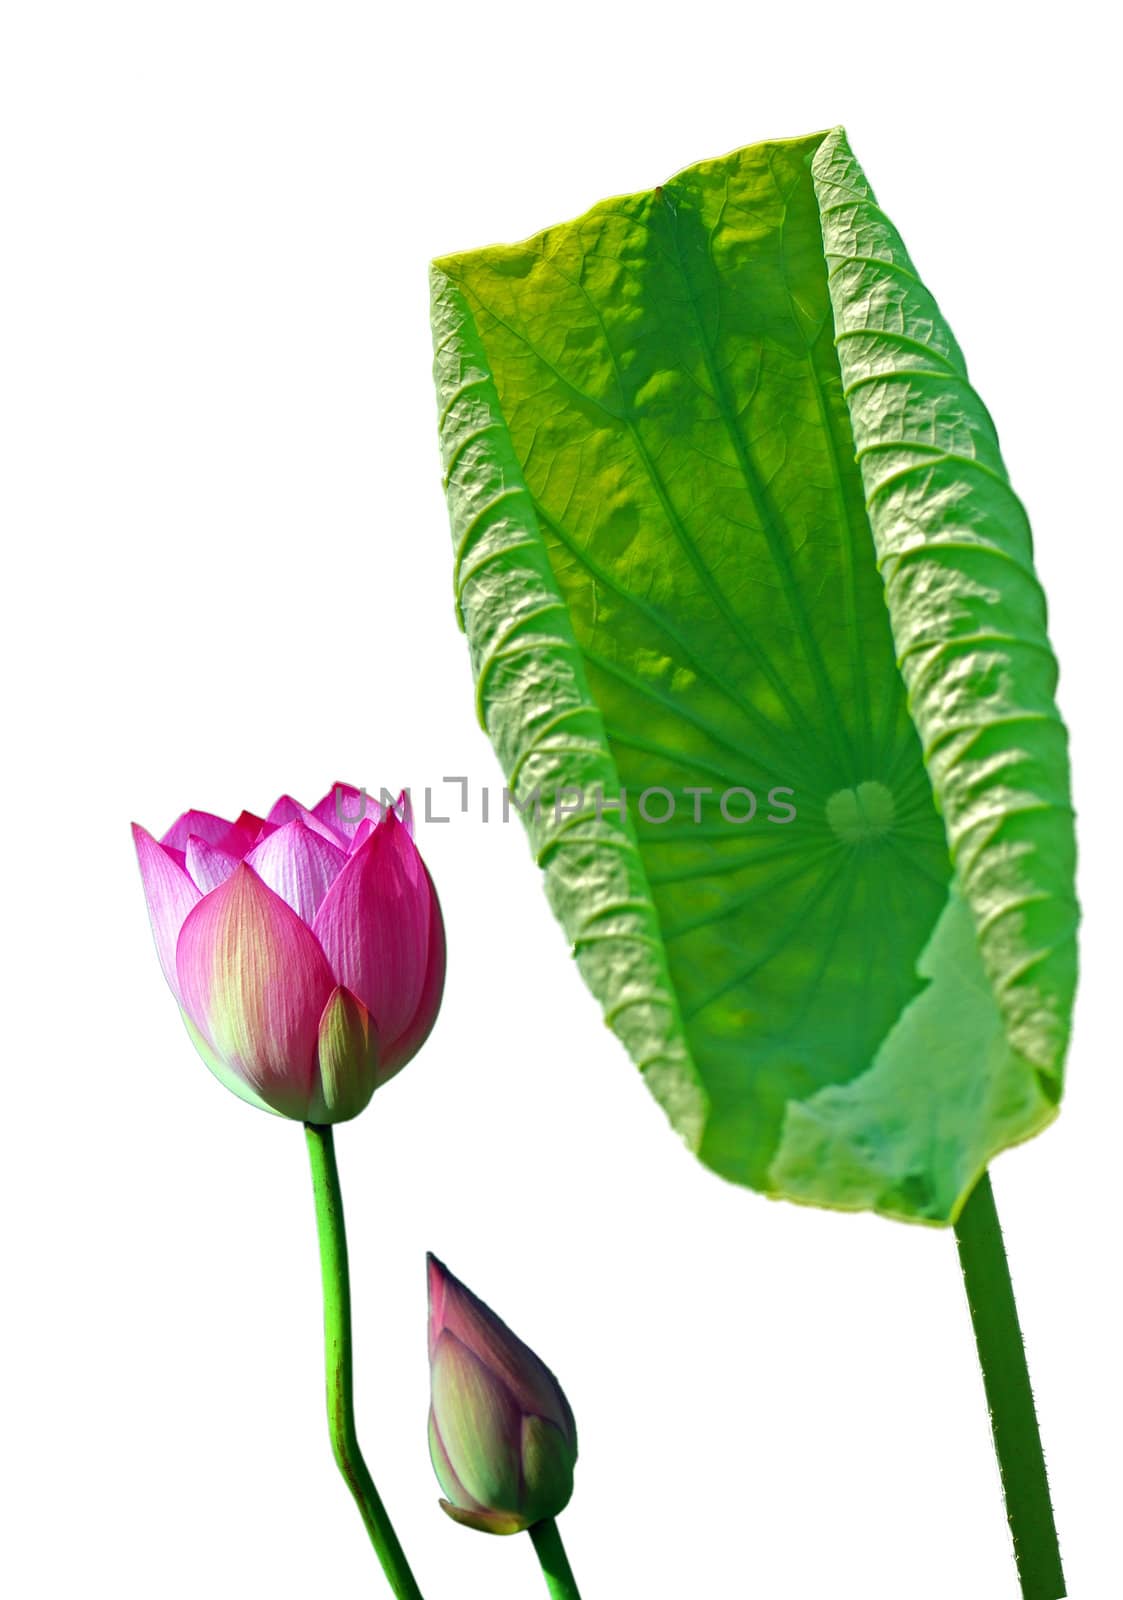 Lotus flower isolated on a white background